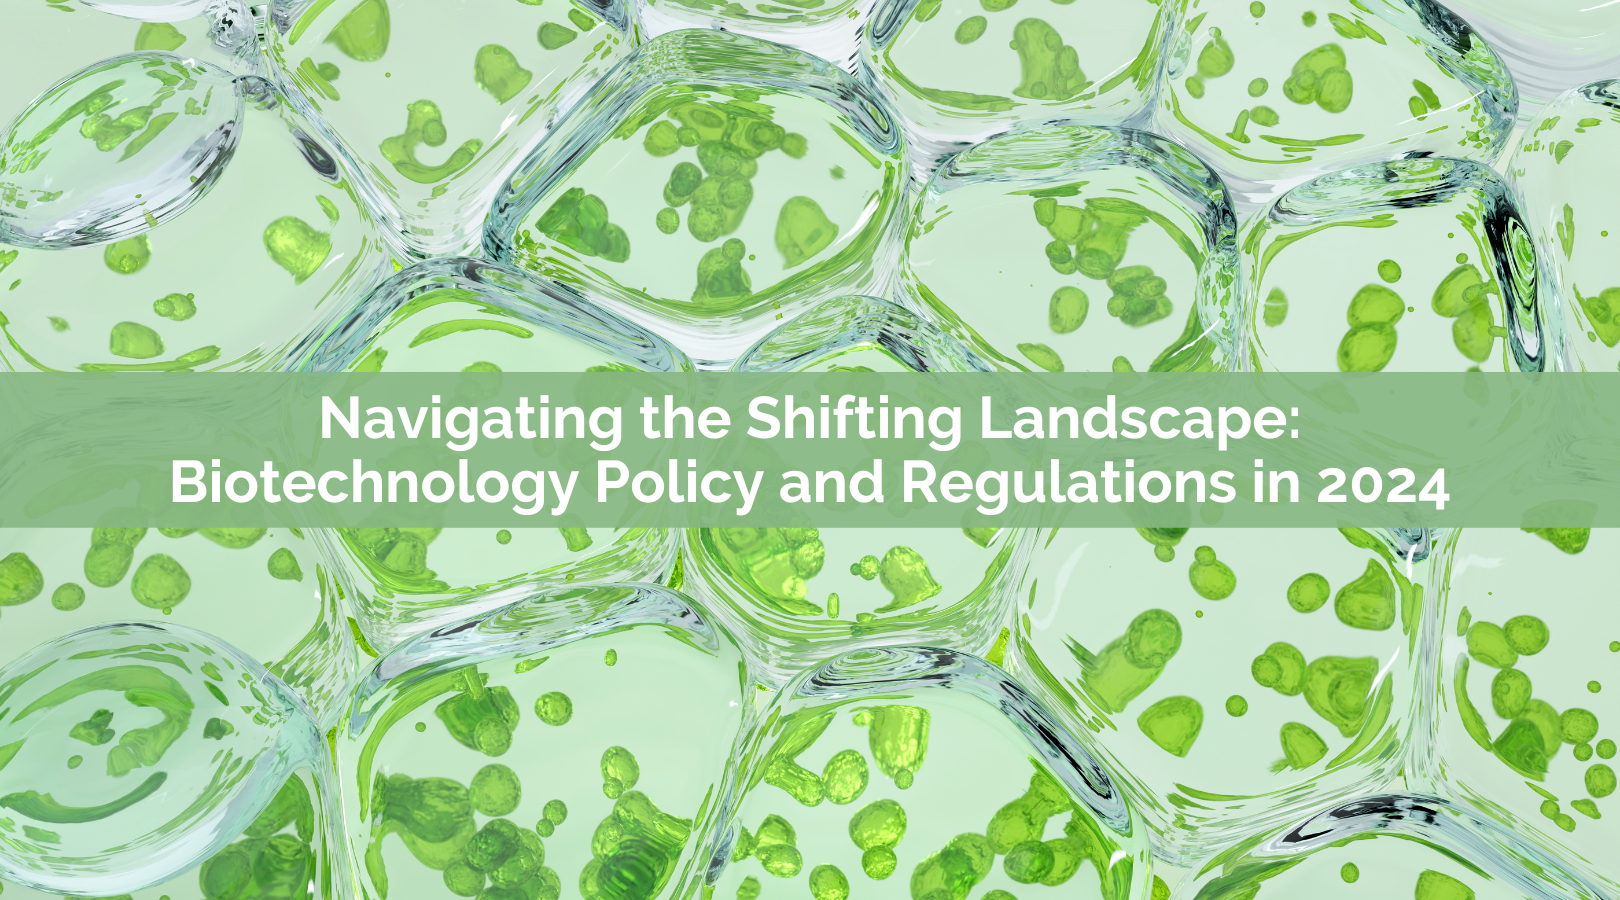 Navigating the Shifting Landscape: Biotechnology Policy and Regulations in 2024